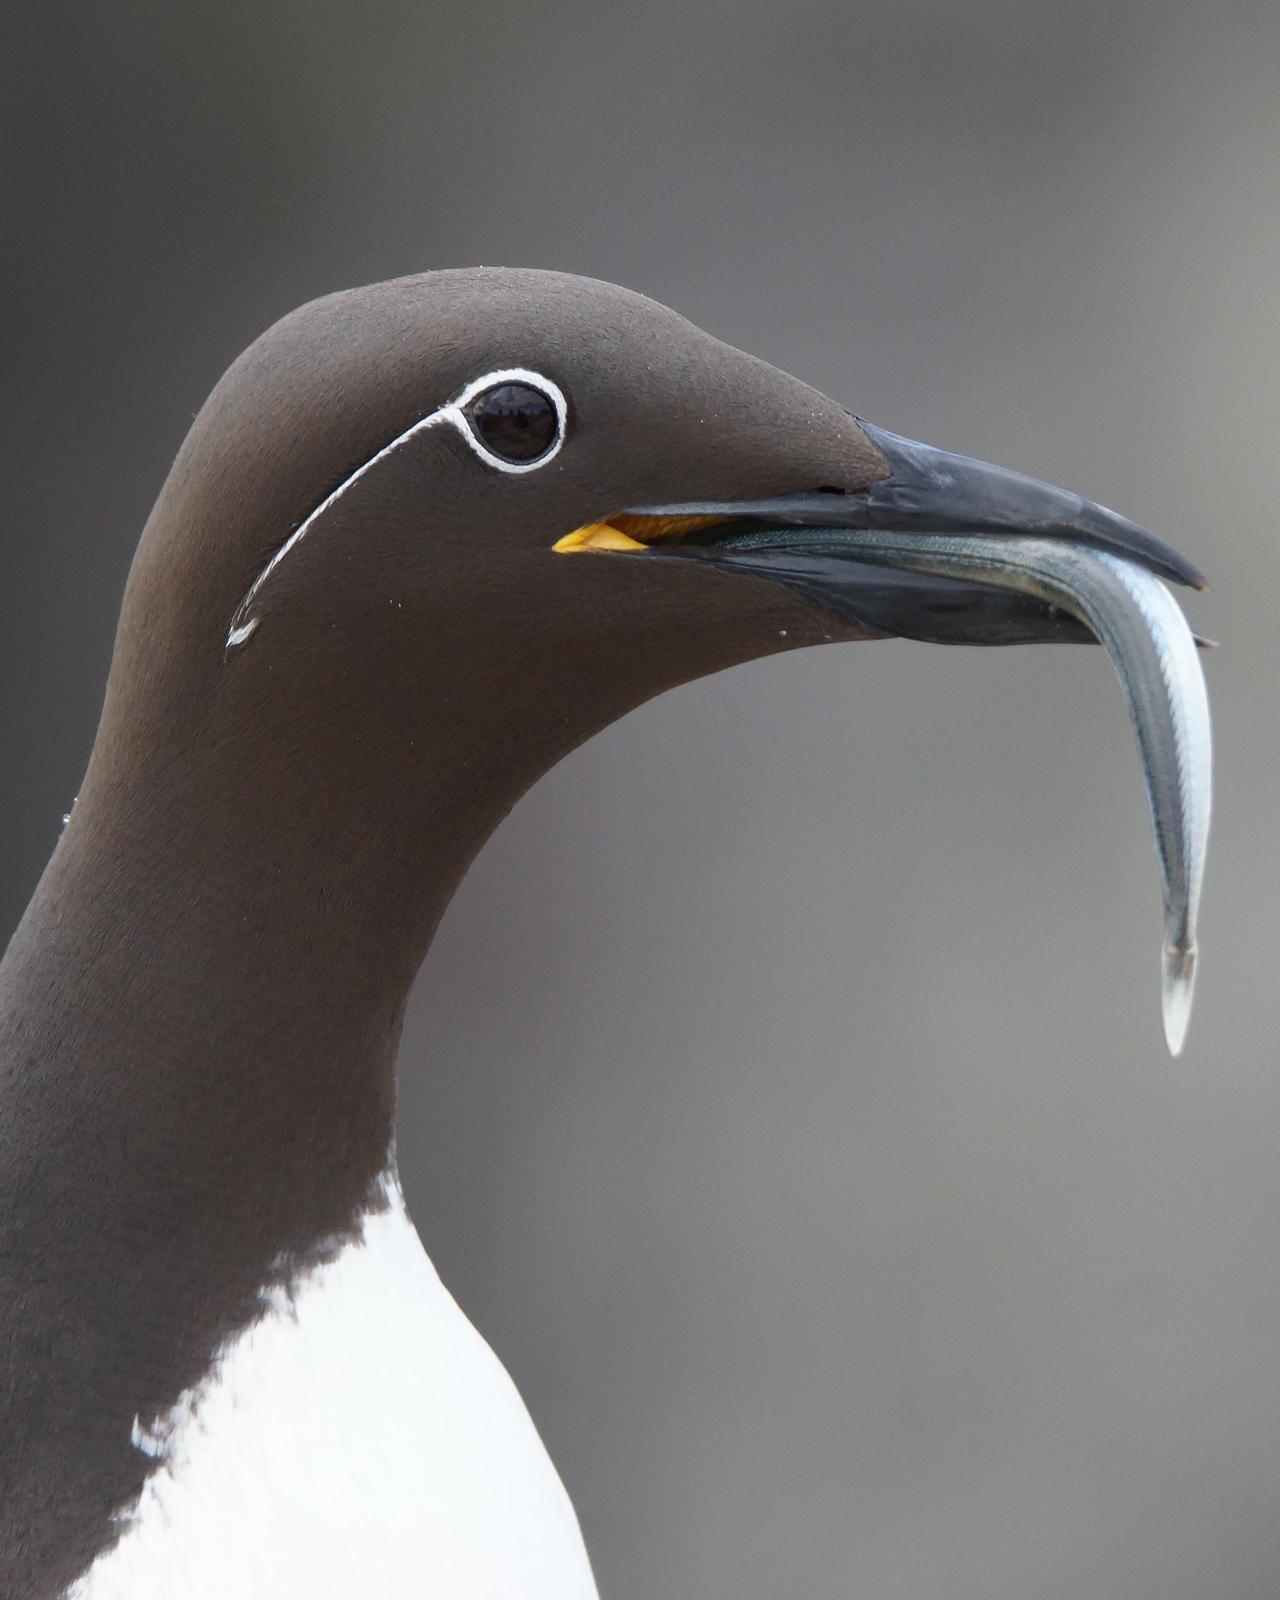 Common Murre Photo by Steve Percival